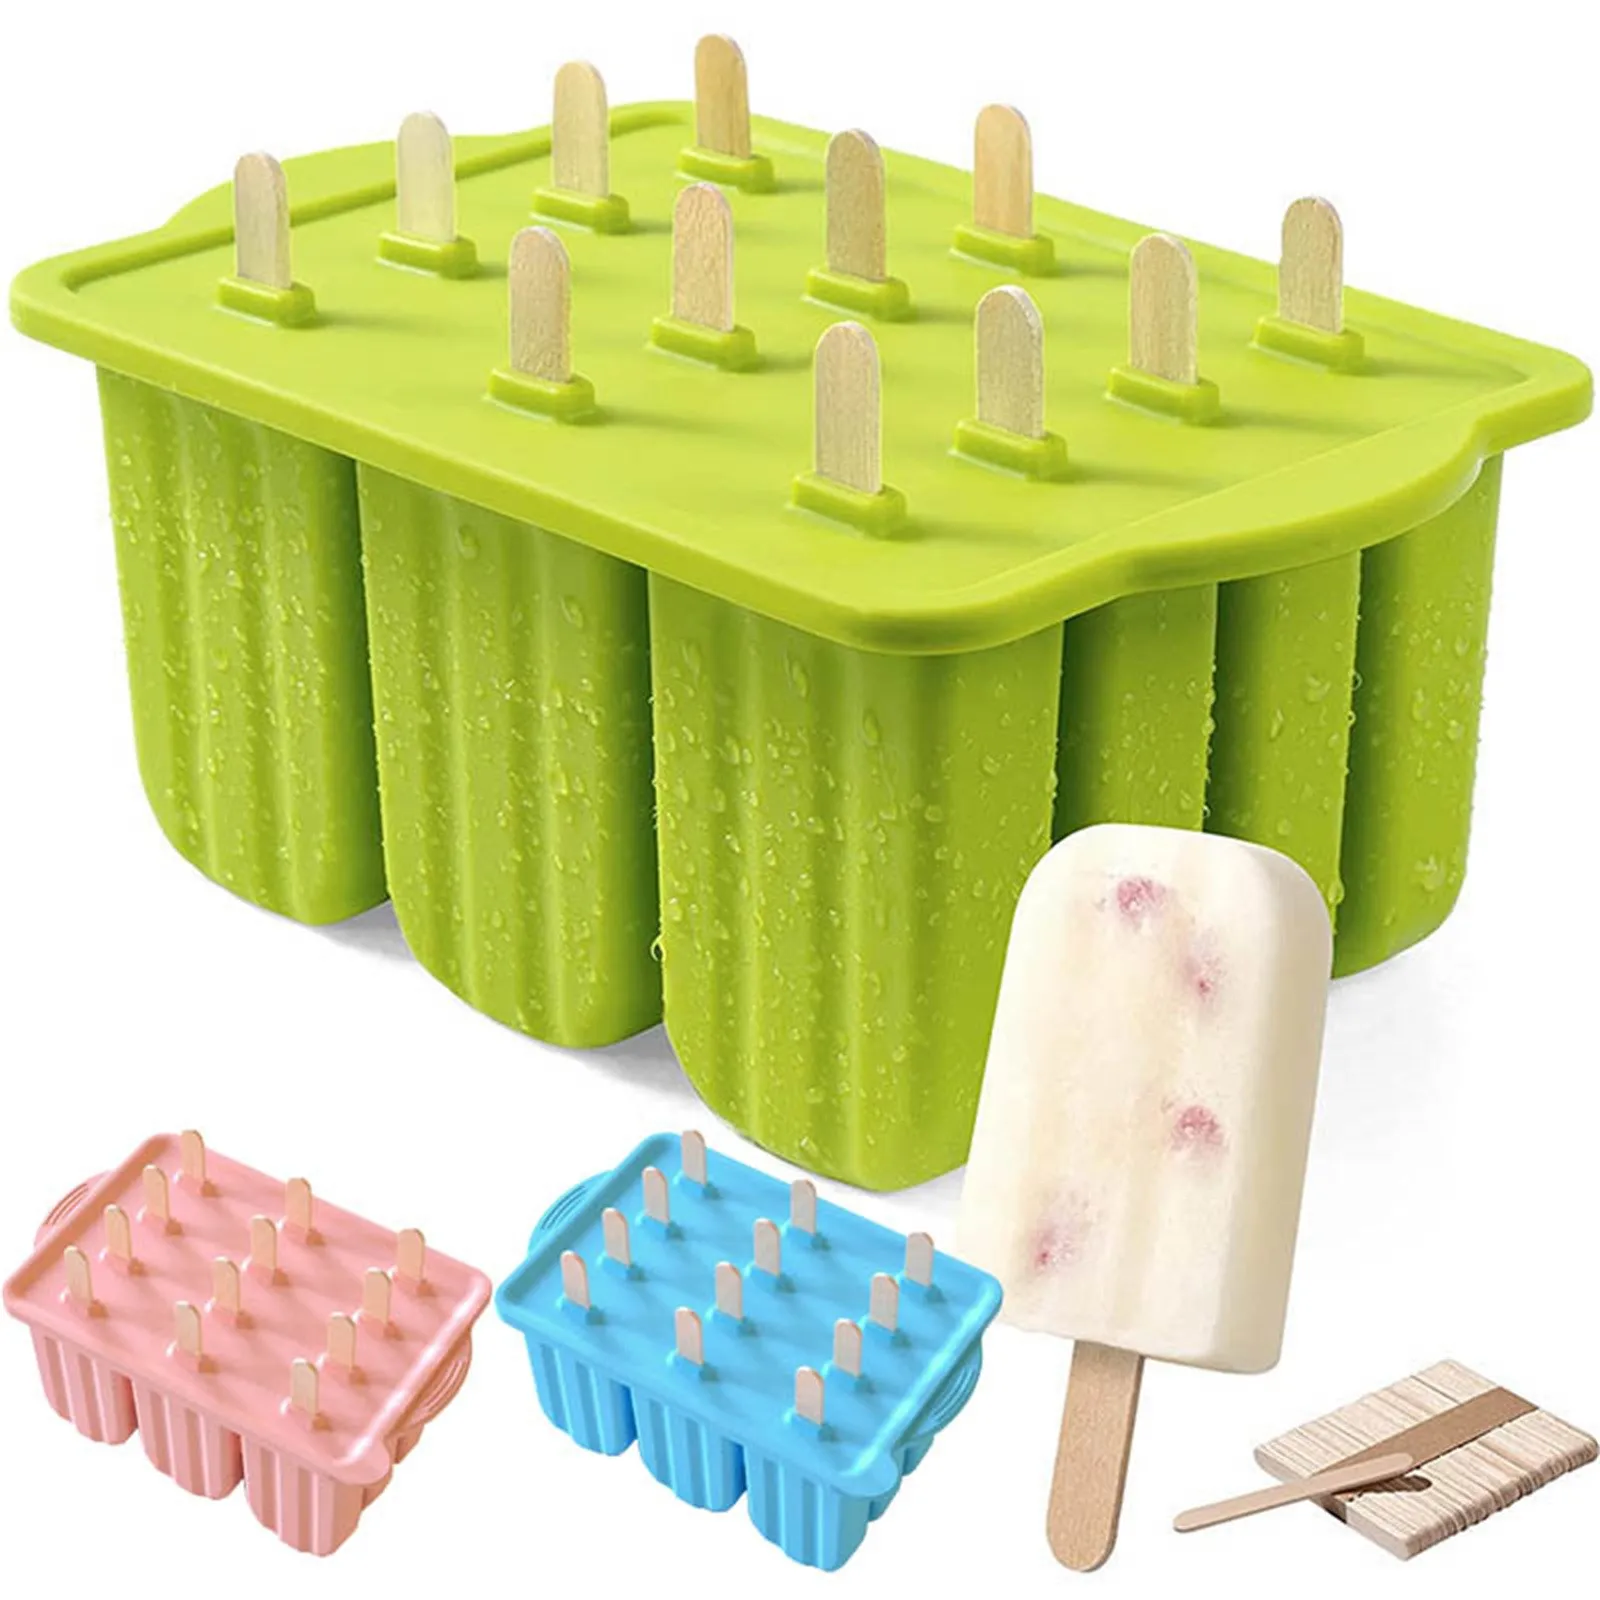 https://ae01.alicdn.com/kf/S112185fe34c8427d9e1de5ea3acb36b0R/Popsicles-Molds-12-Pieces-Silicone-Popsicle-Maker-Molds-Food-Grade-Ice-Molds-With-Ice-Cream-50.jpg